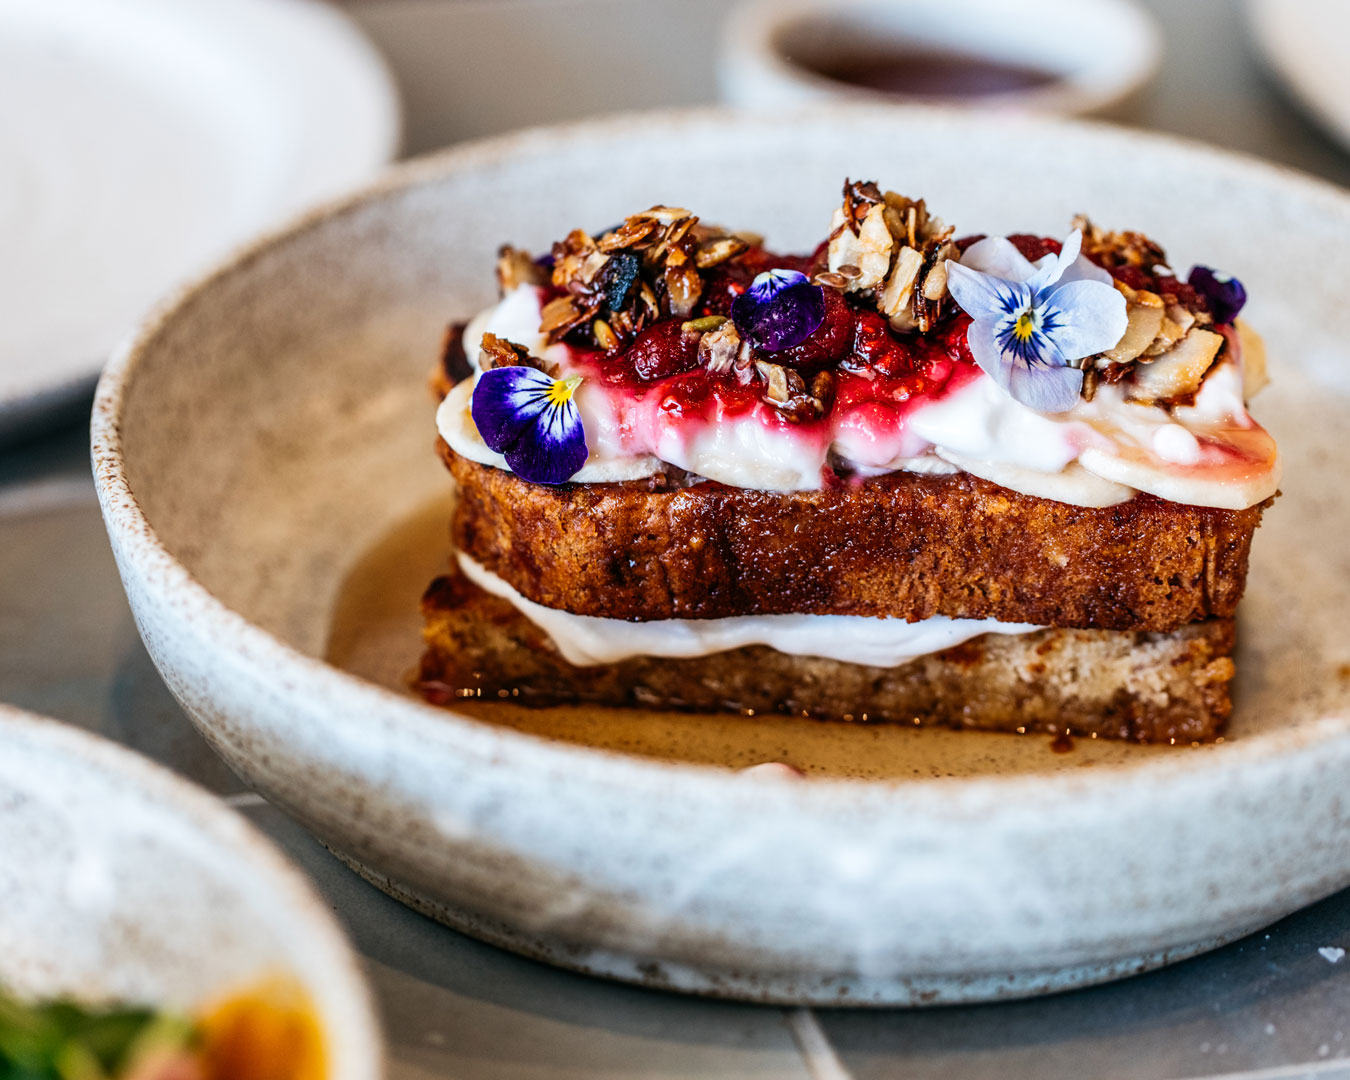 Frecnh toast in a ceramic bowl from a cafe in Bondi